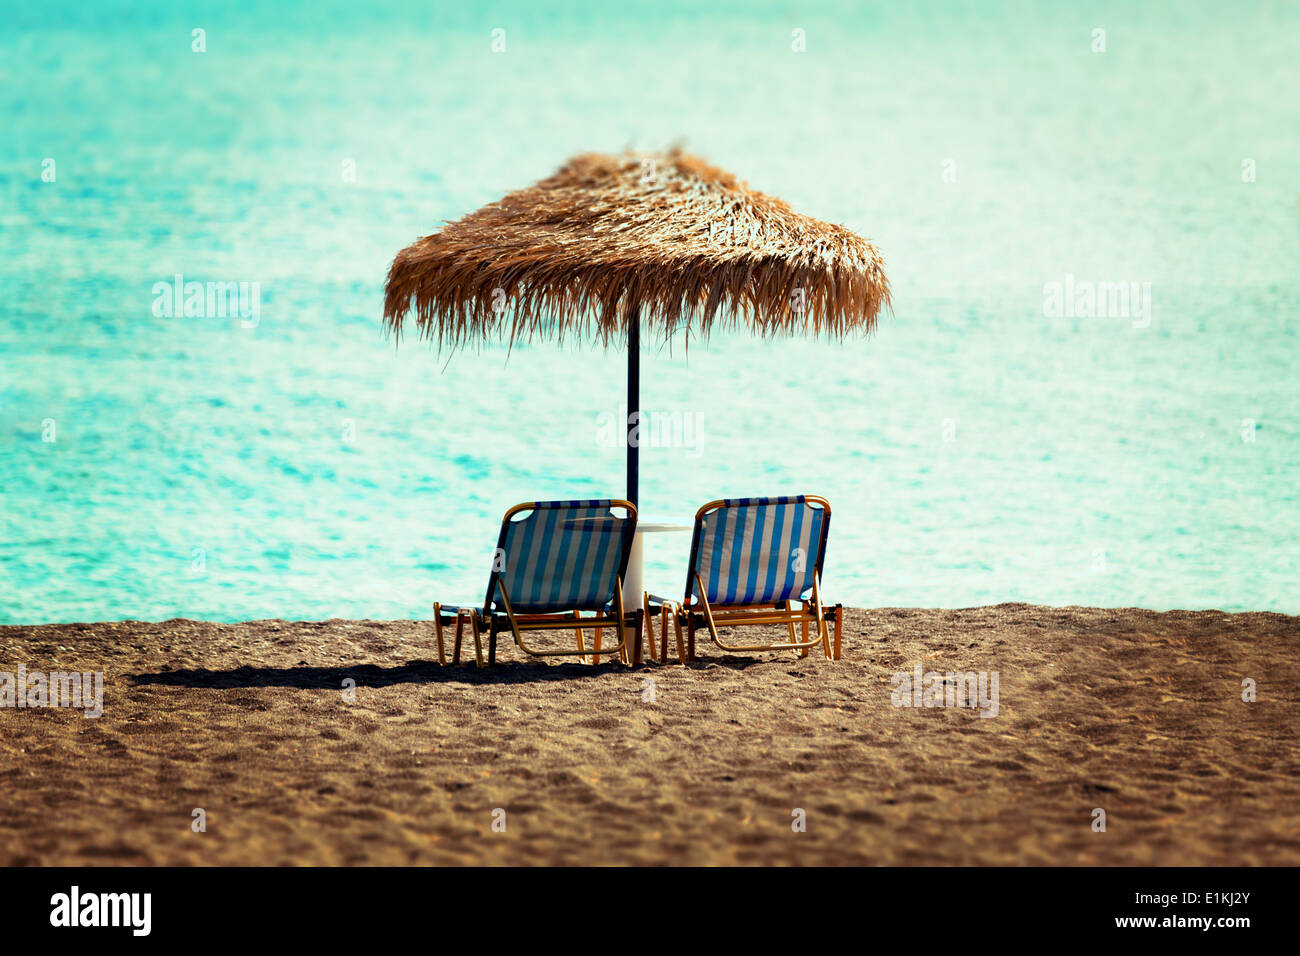 Sunloungers and parasol on an empty beach. Stock Photo